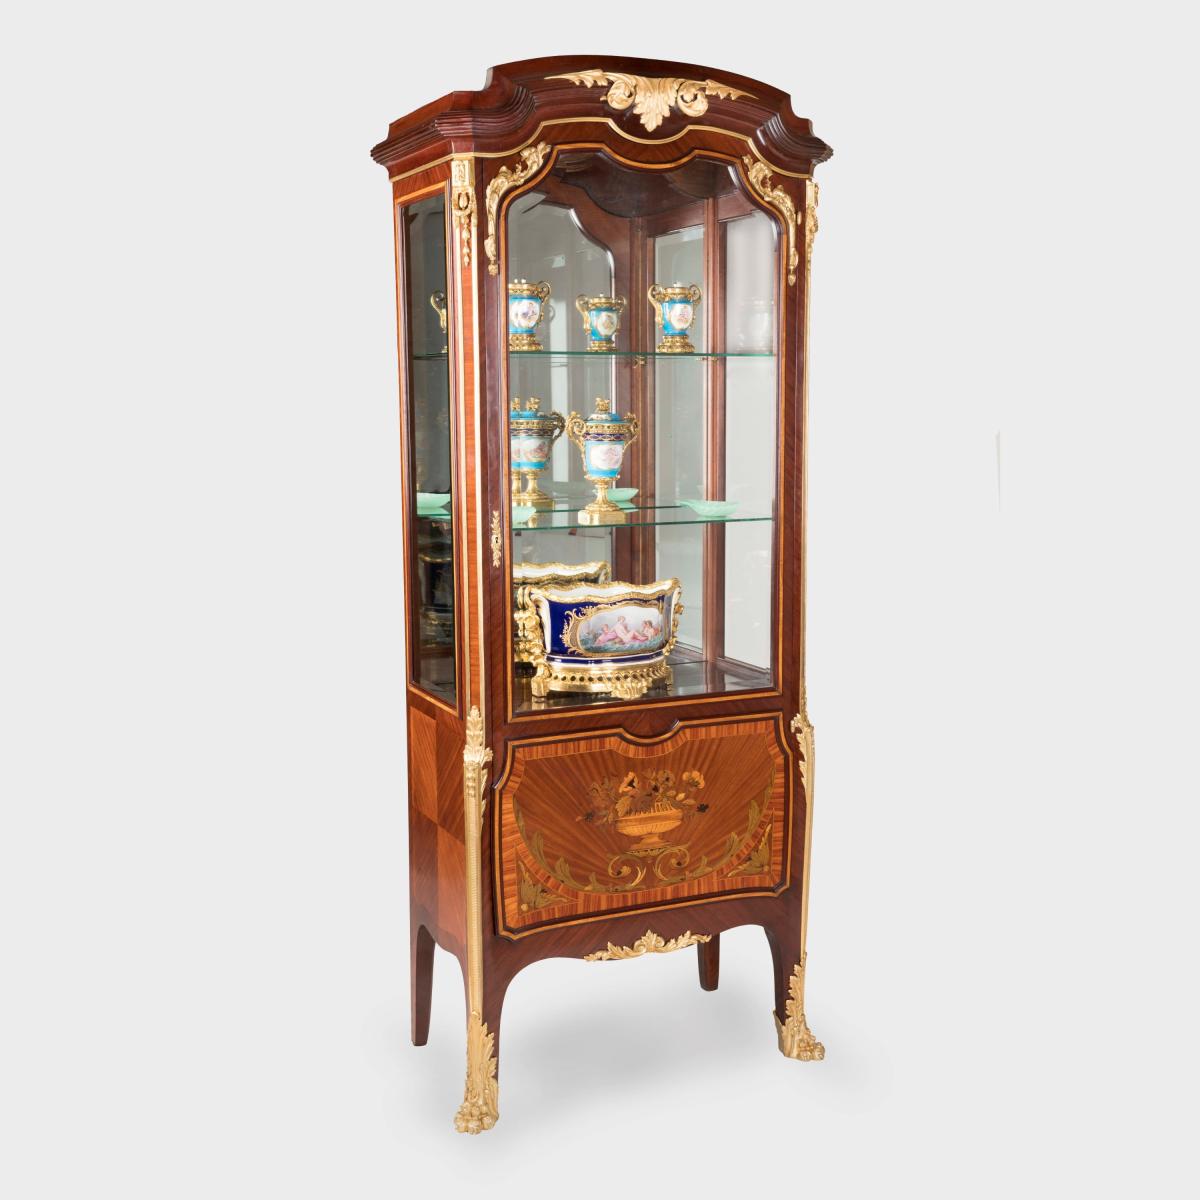 A Pair of Marquetry Display Cabinets By Edmund Kahn